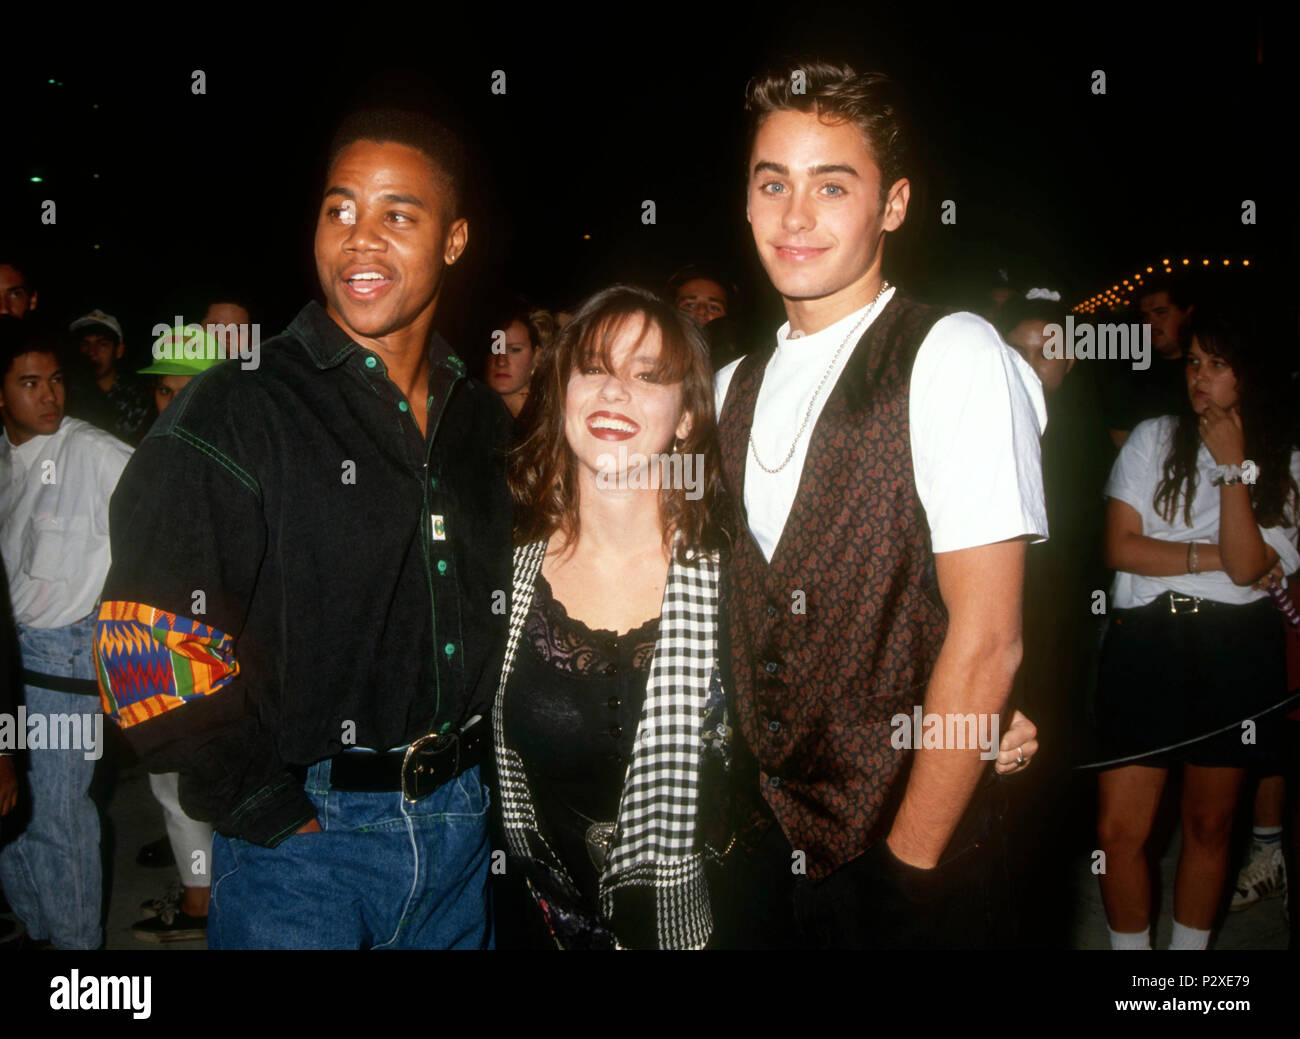 LOS ANGELES, CA - OCTOBER 17:  (L-R) Actor Cuba Gooding Jr., actress Soleil Moon Frye and actor/singer Jared Leto attend the premiere of 'Cool As Ice' on October 17, 1991 in Los Angeles, California. Photo by Barry King/Alamy Stock Photo Stock Photo